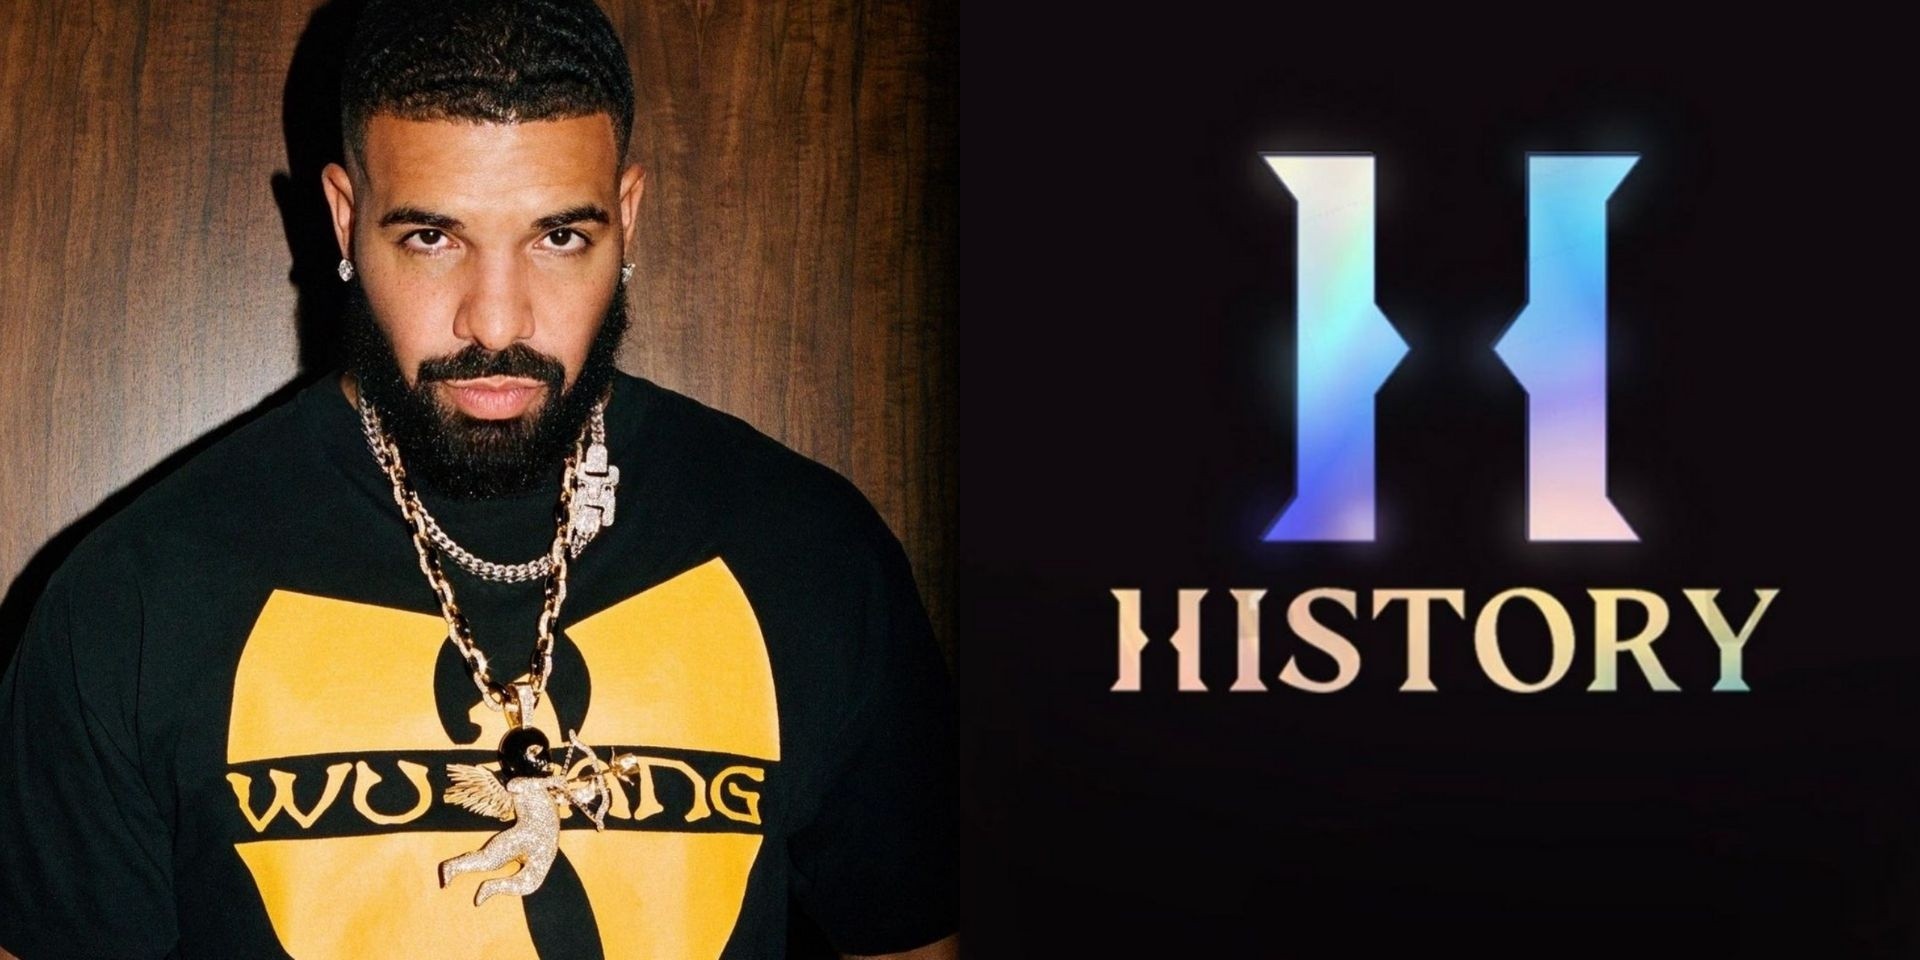 Drake partners with Live Nation to launch new Toronto venue, History